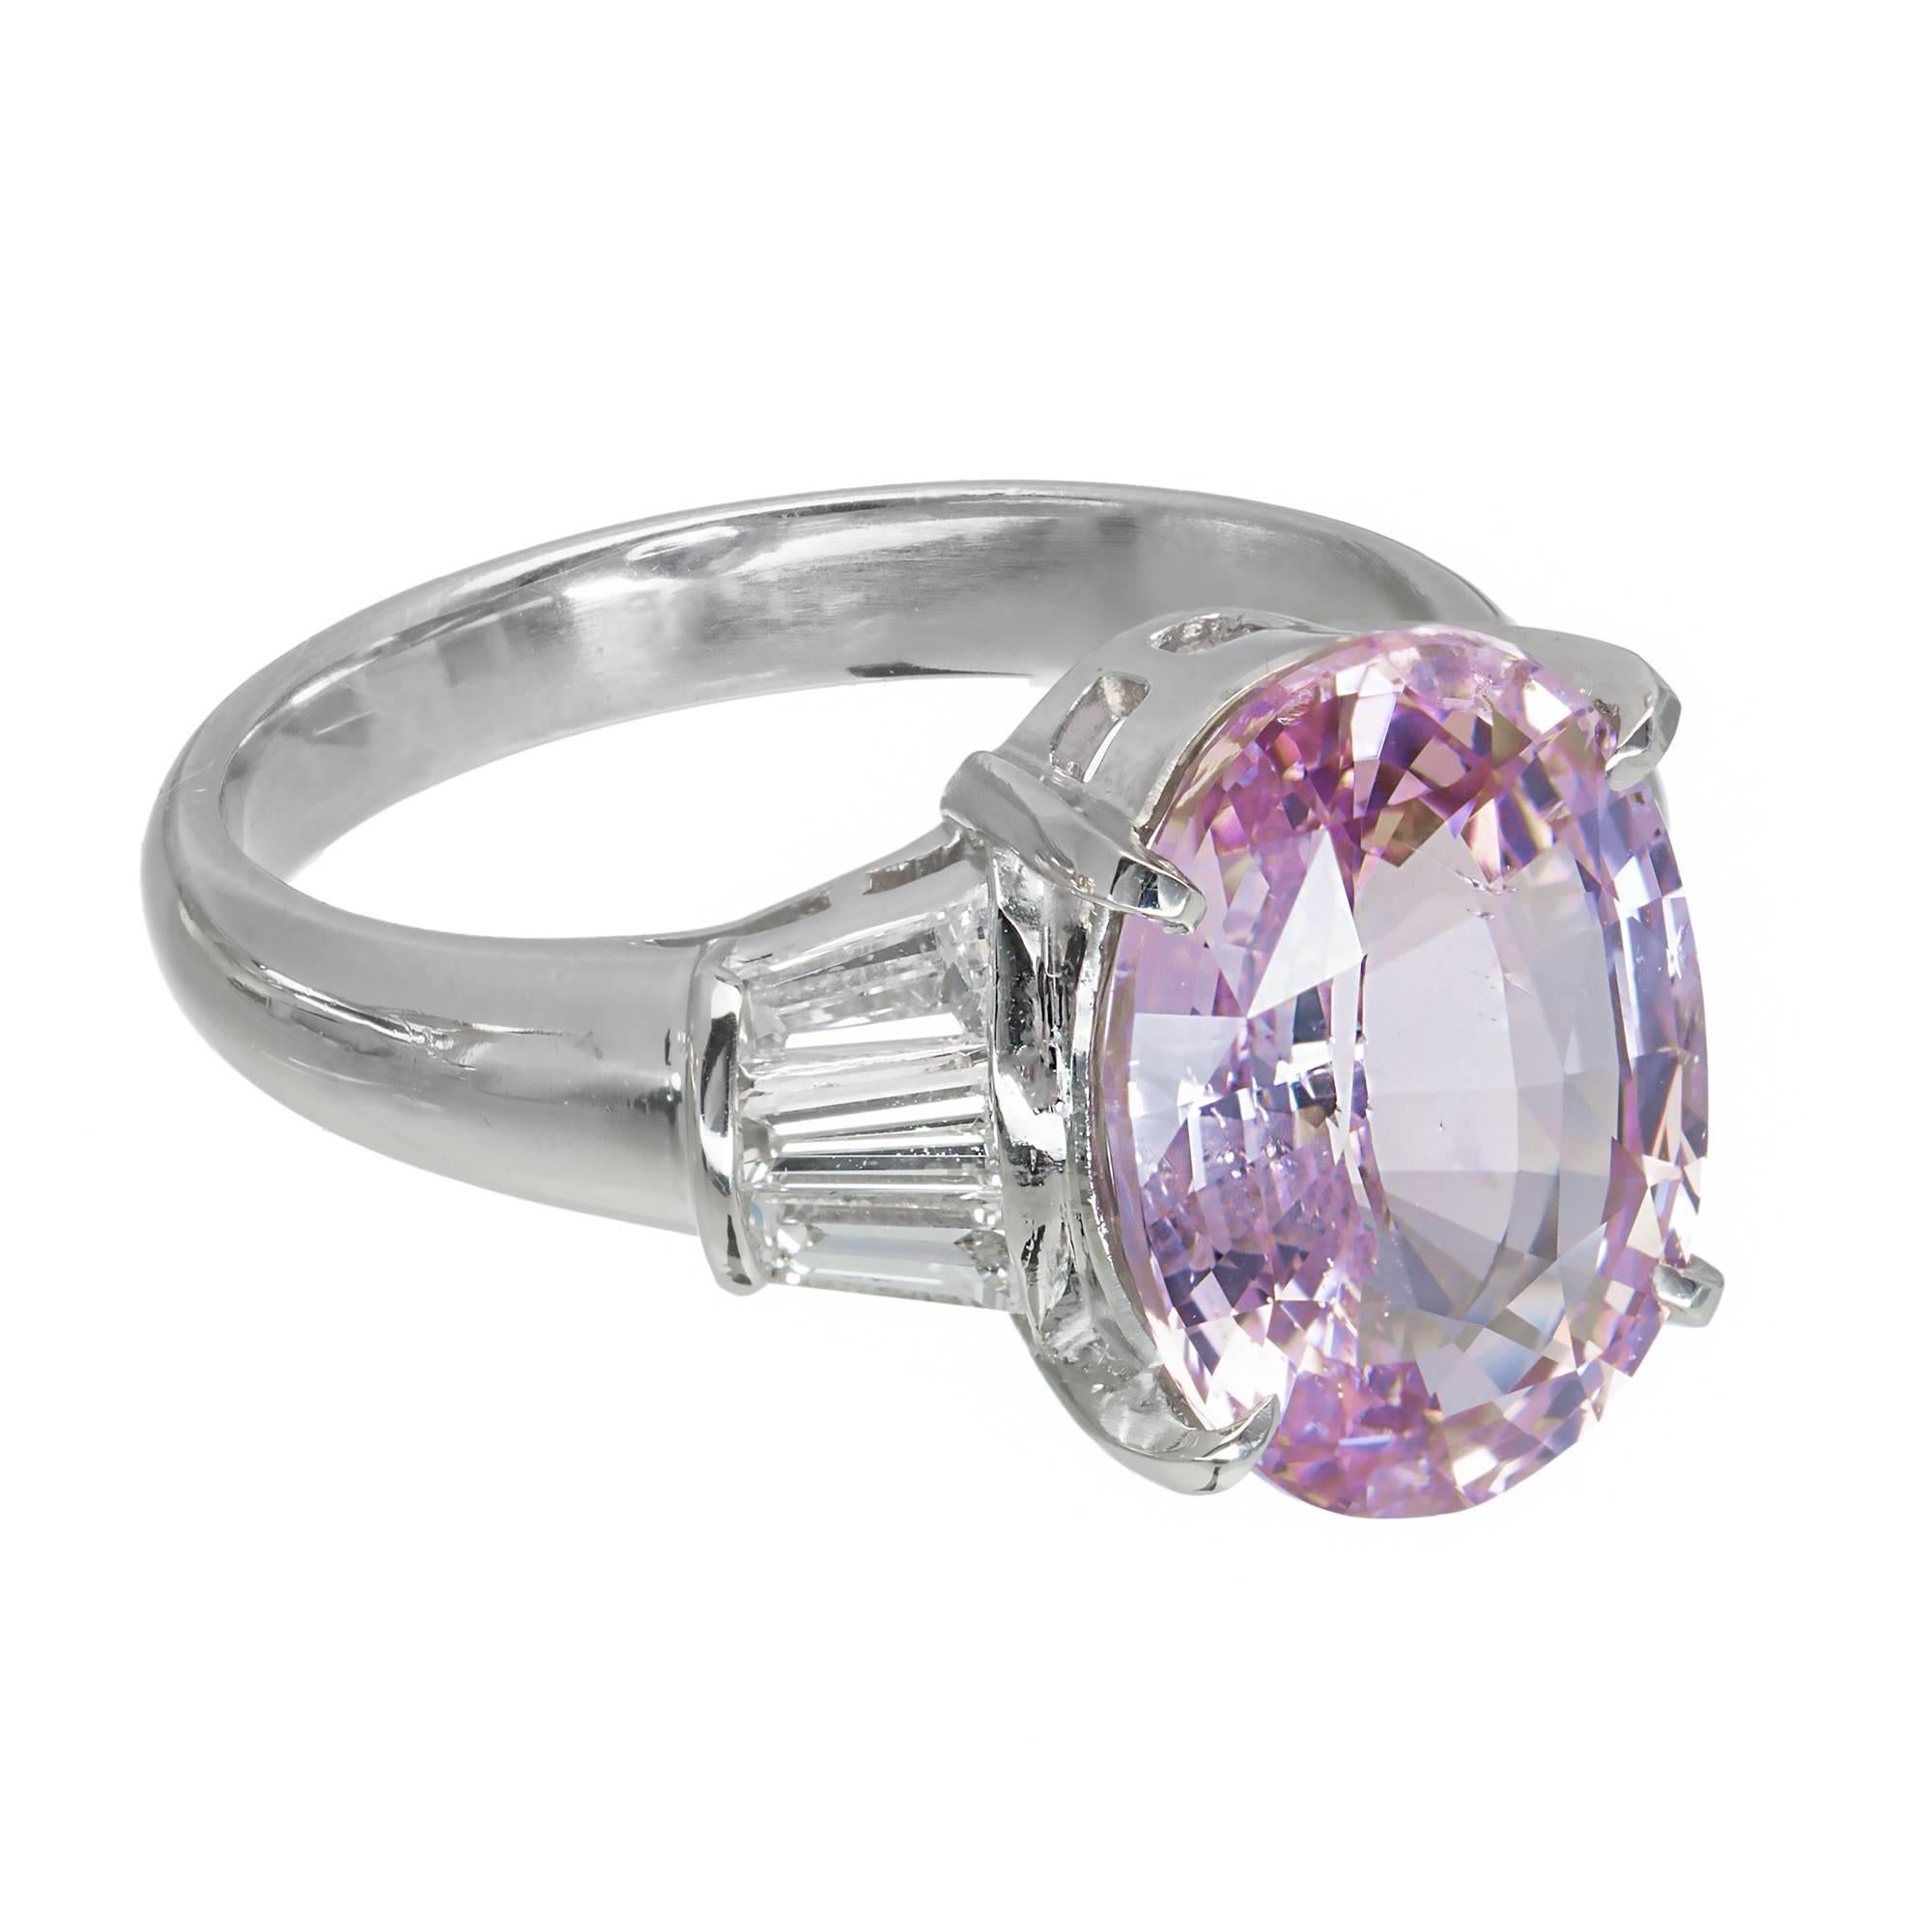 Natural GIA certified purplish pink 5.28ct Sapphire diamond engagement ring. Original 1950-1960 Platinum ring with tapered baguette Diamond accents. In both Diamond and Sapphire purplish pink is a very sought after natural color. In addition to the